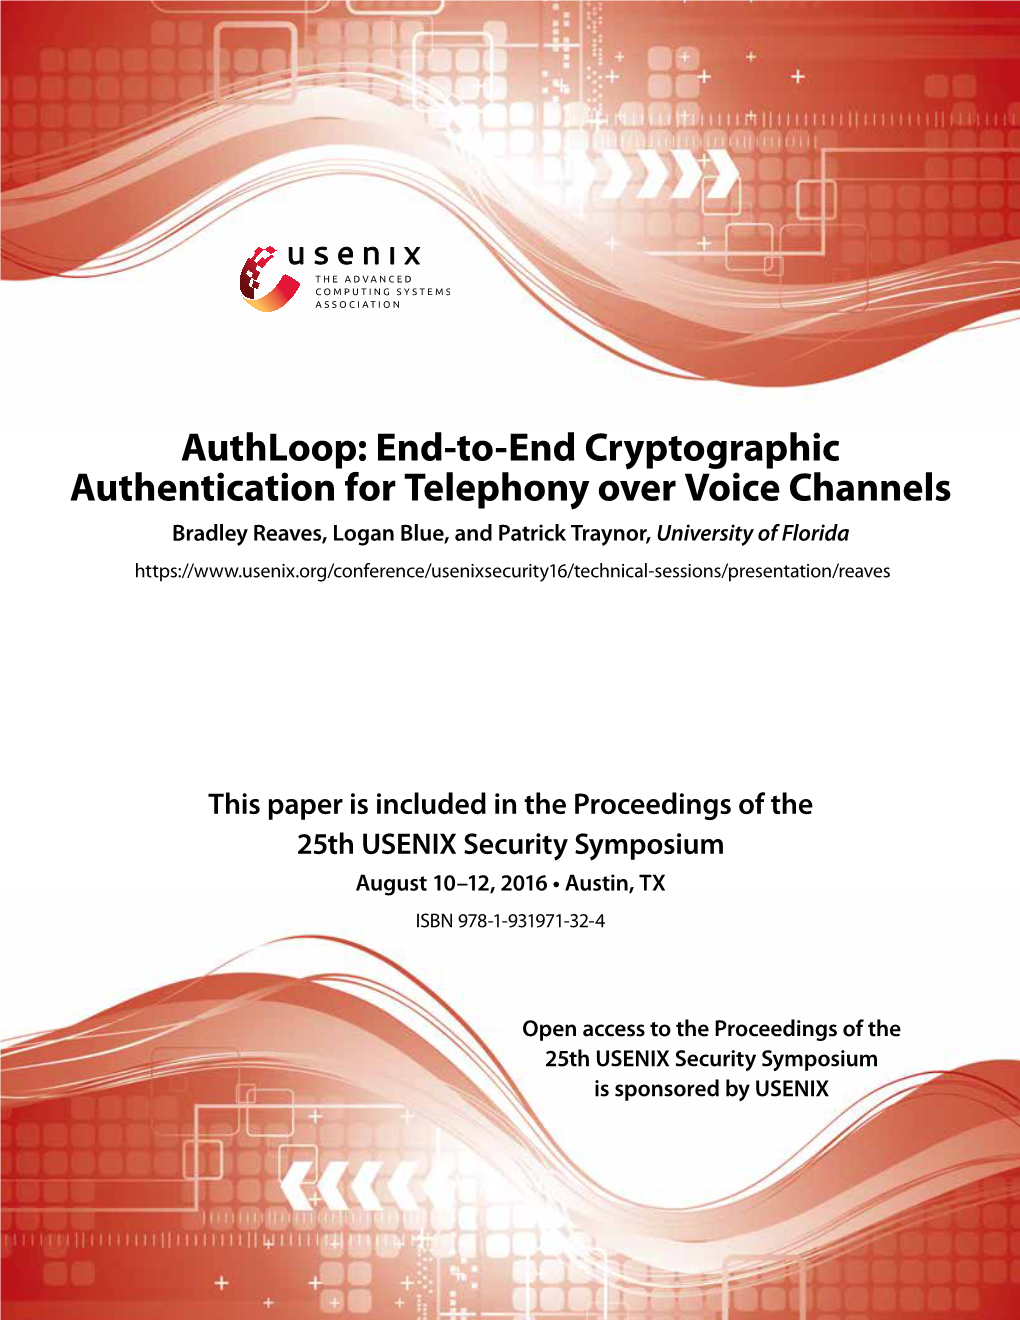 Authloop: End-To-End Cryptographic Authentication for Telephony Over Voice Channels